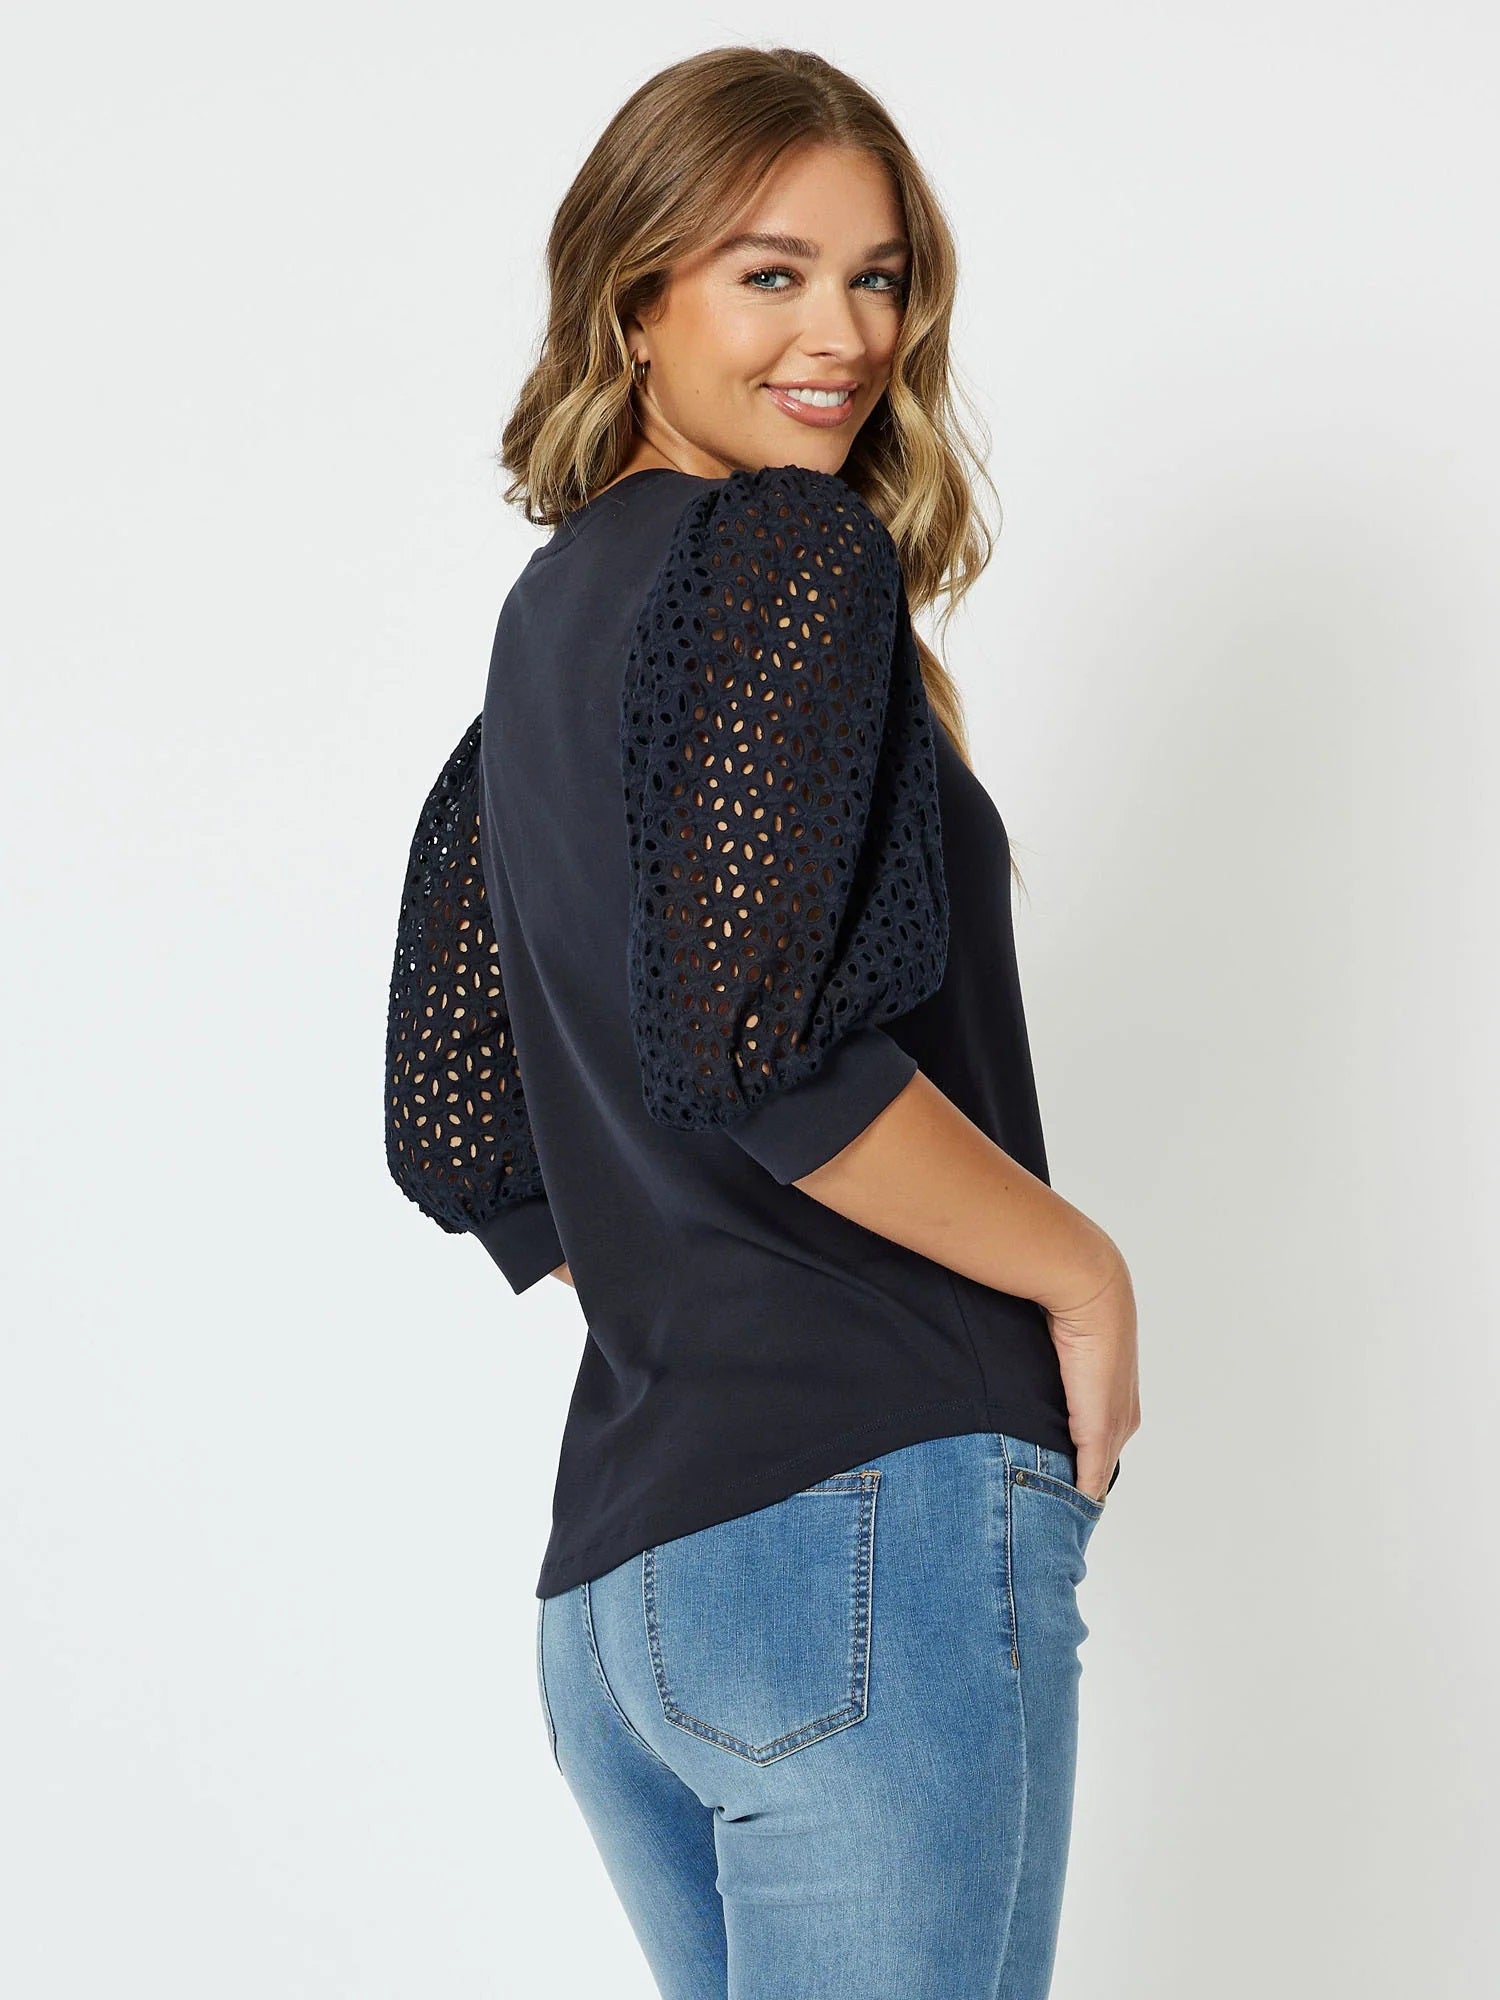 Lace Top - Navy Blue Shirt - Long Sleeve Top - Navy Blouse - Lulus